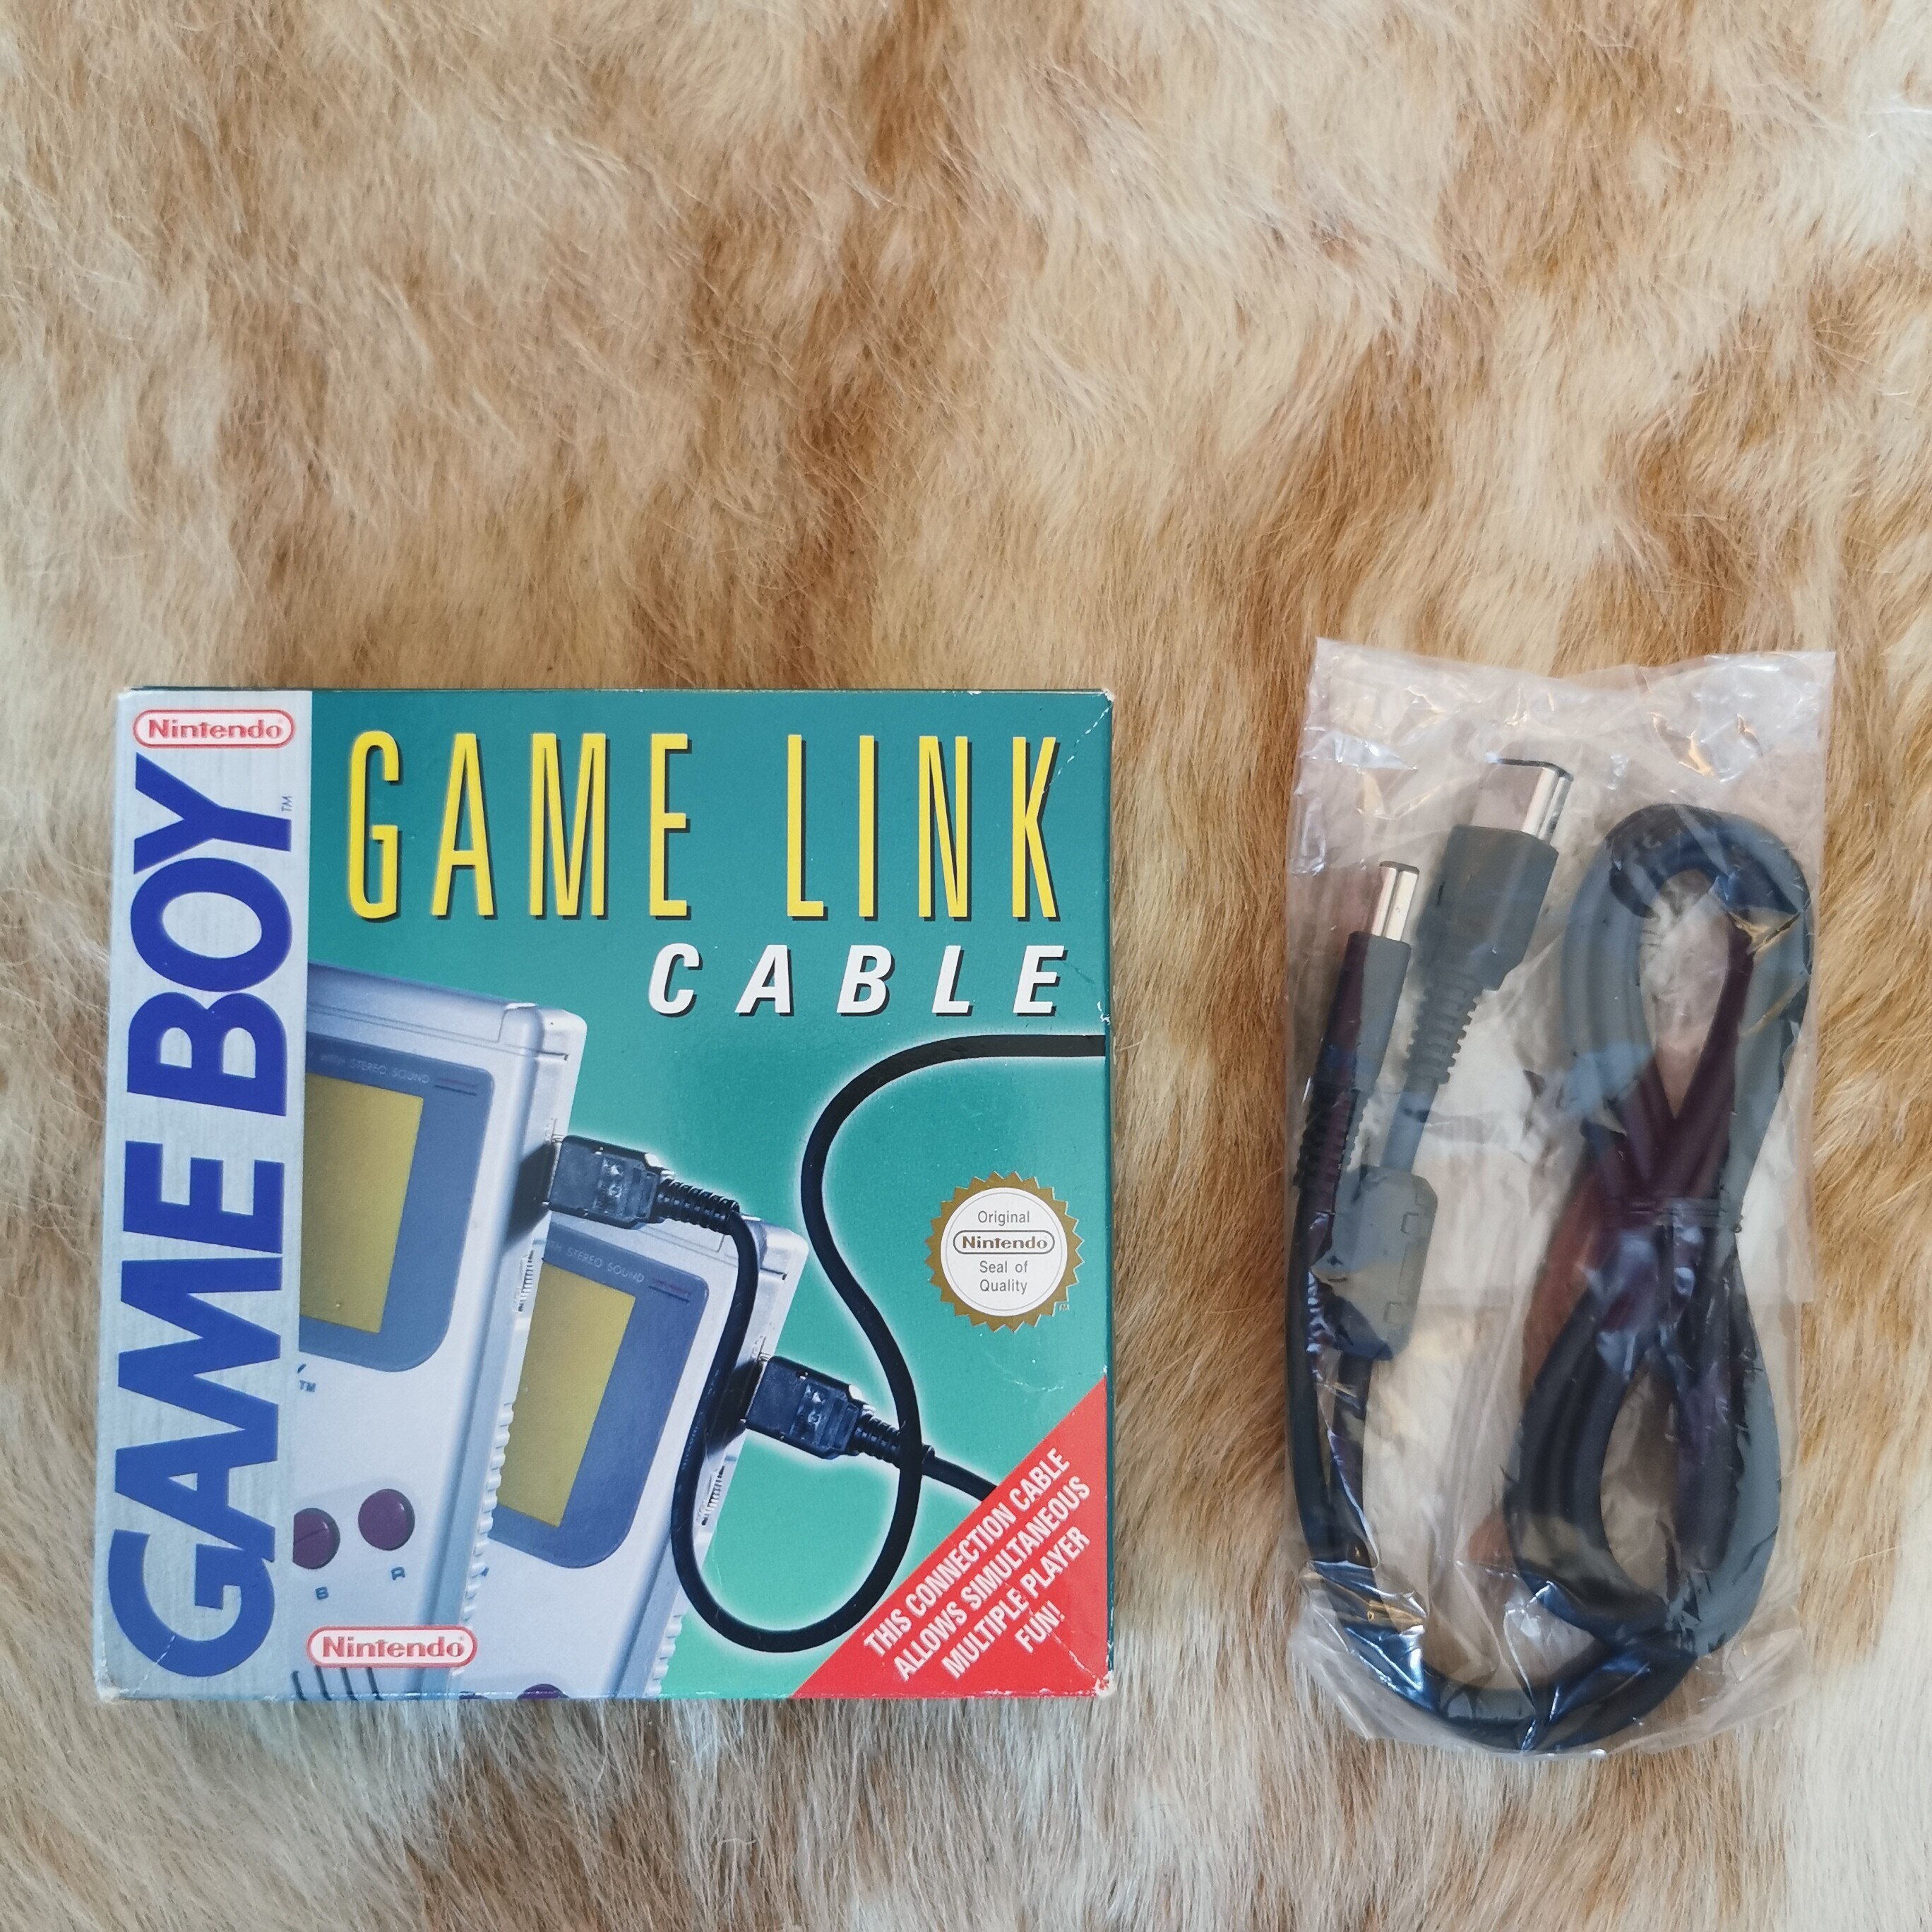  Nintendo Game Boy Game Link Cable [UK]